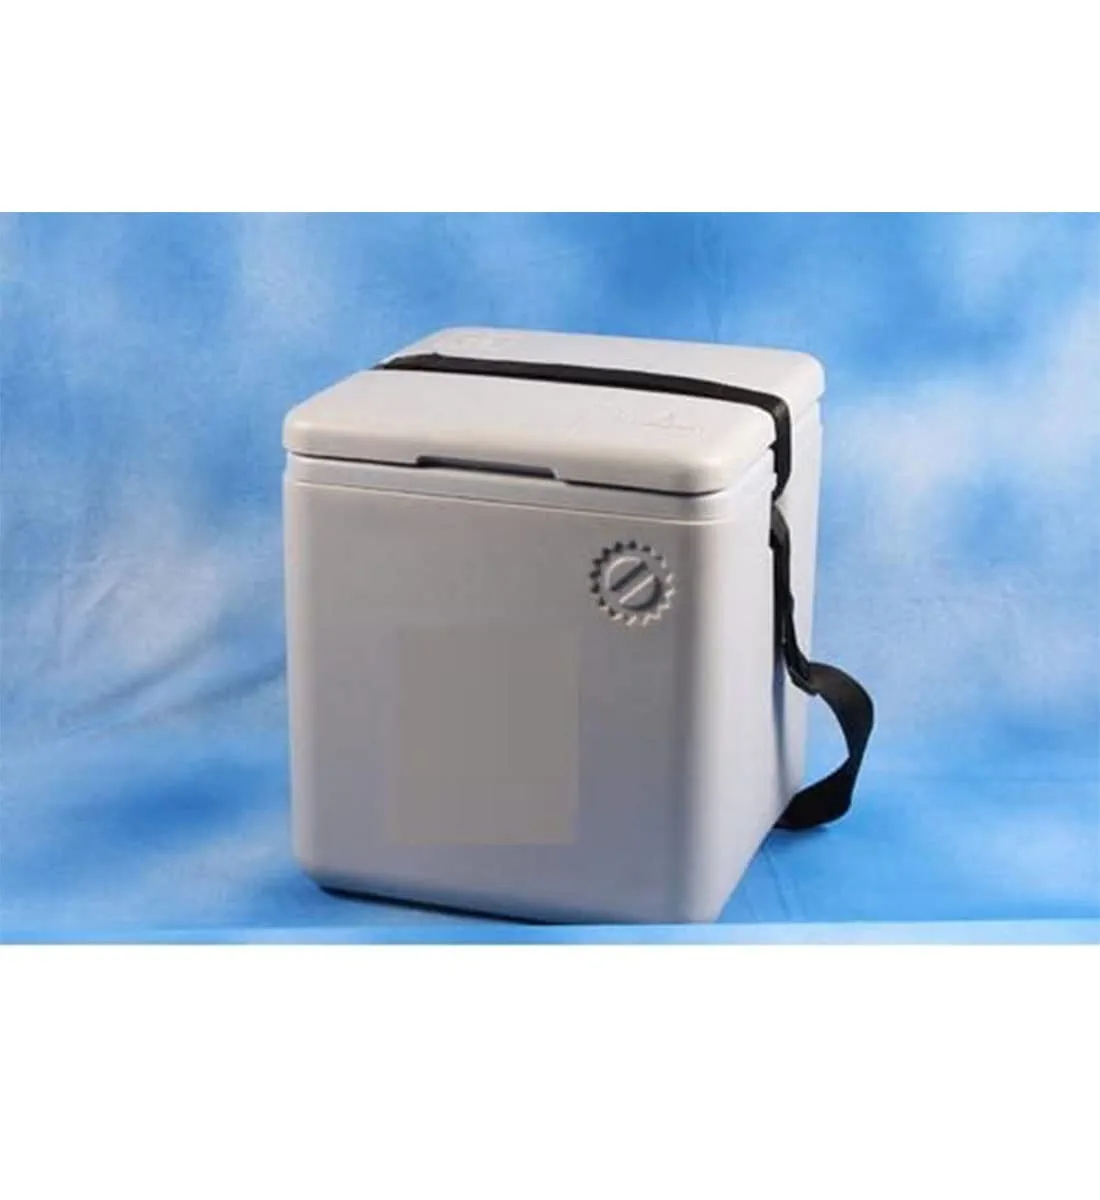 Small Day Vaccine Carrier Box - Get Best Price from Manufacturers &  Suppliers in India